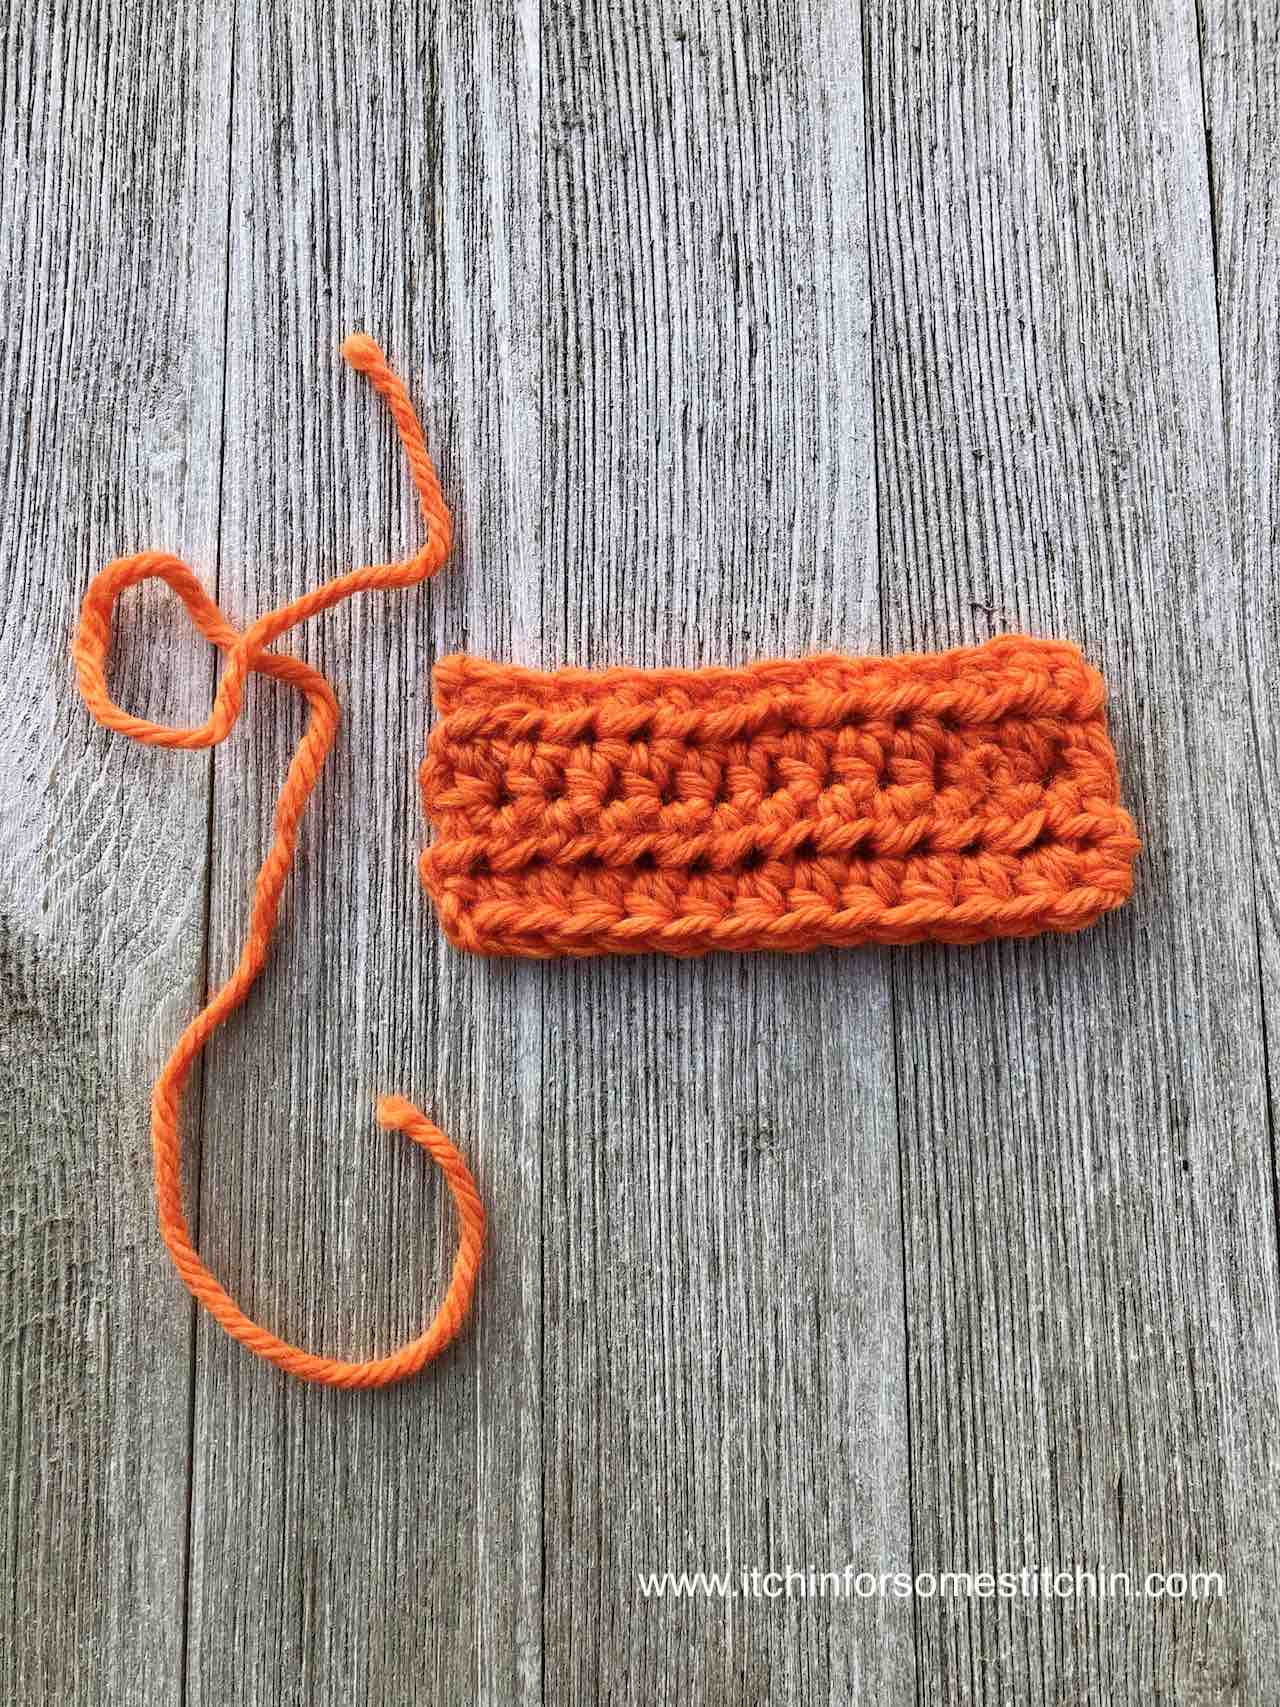 How to Crochet a Bow by www.itchinforsomestitchin.com